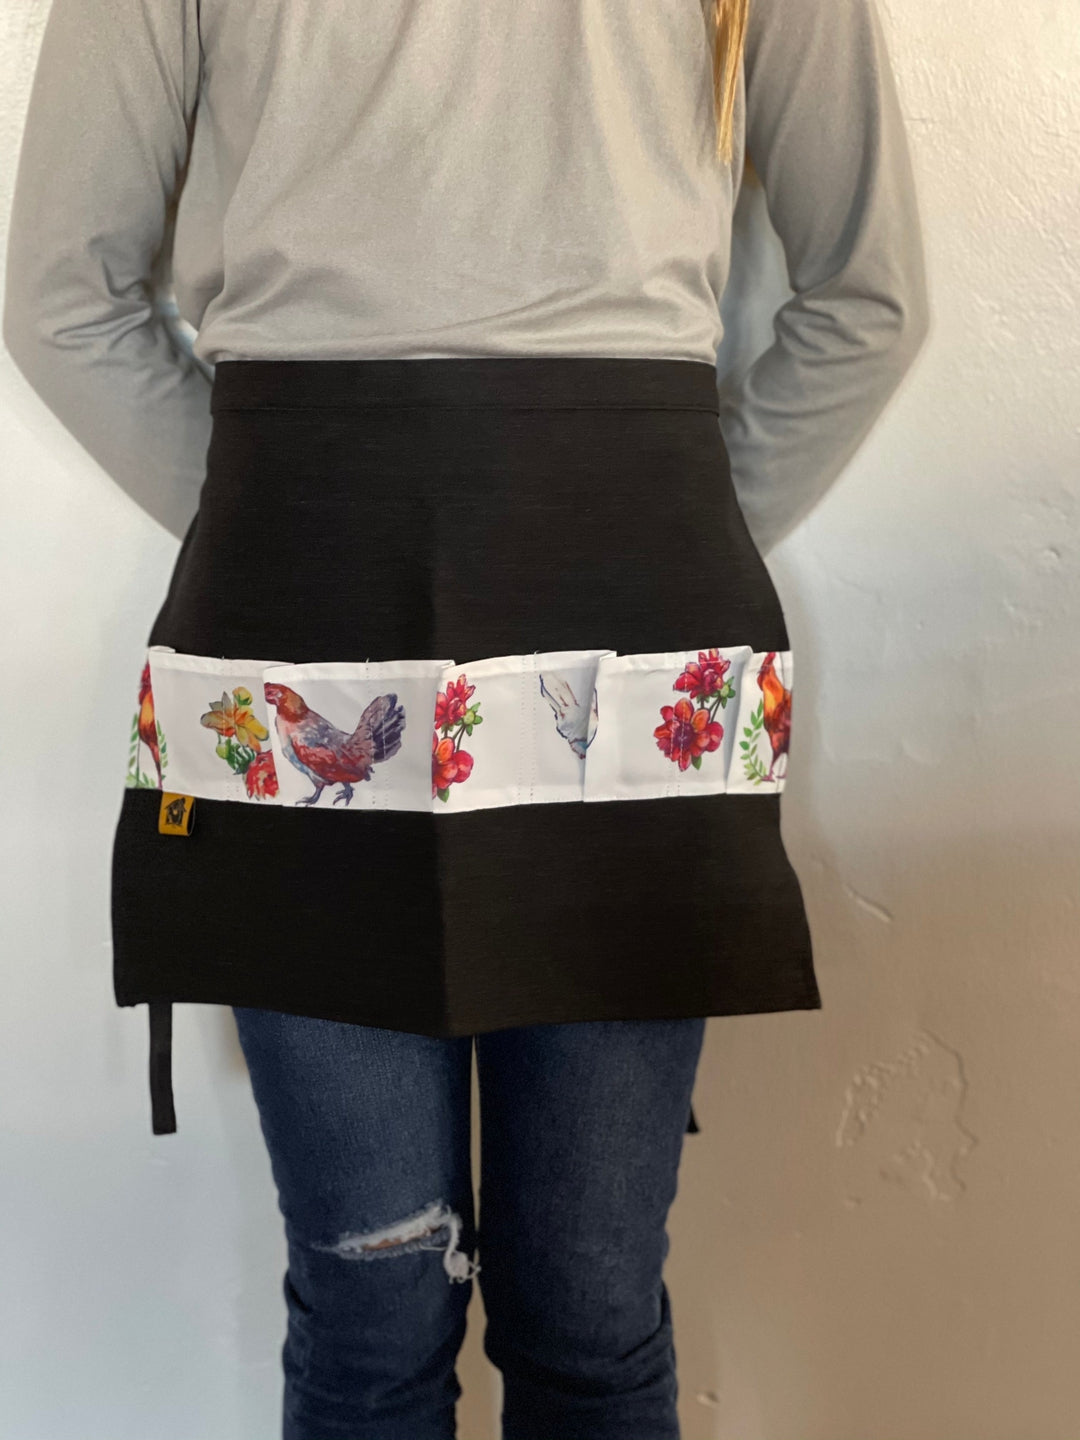 Handmade Christmas Chicken Egg Apron, Lined Pocket Apron Fabric Egg Apron,  Farm Egg Apron, Christmas Chicken Egg Collecting, Half Body Apron 